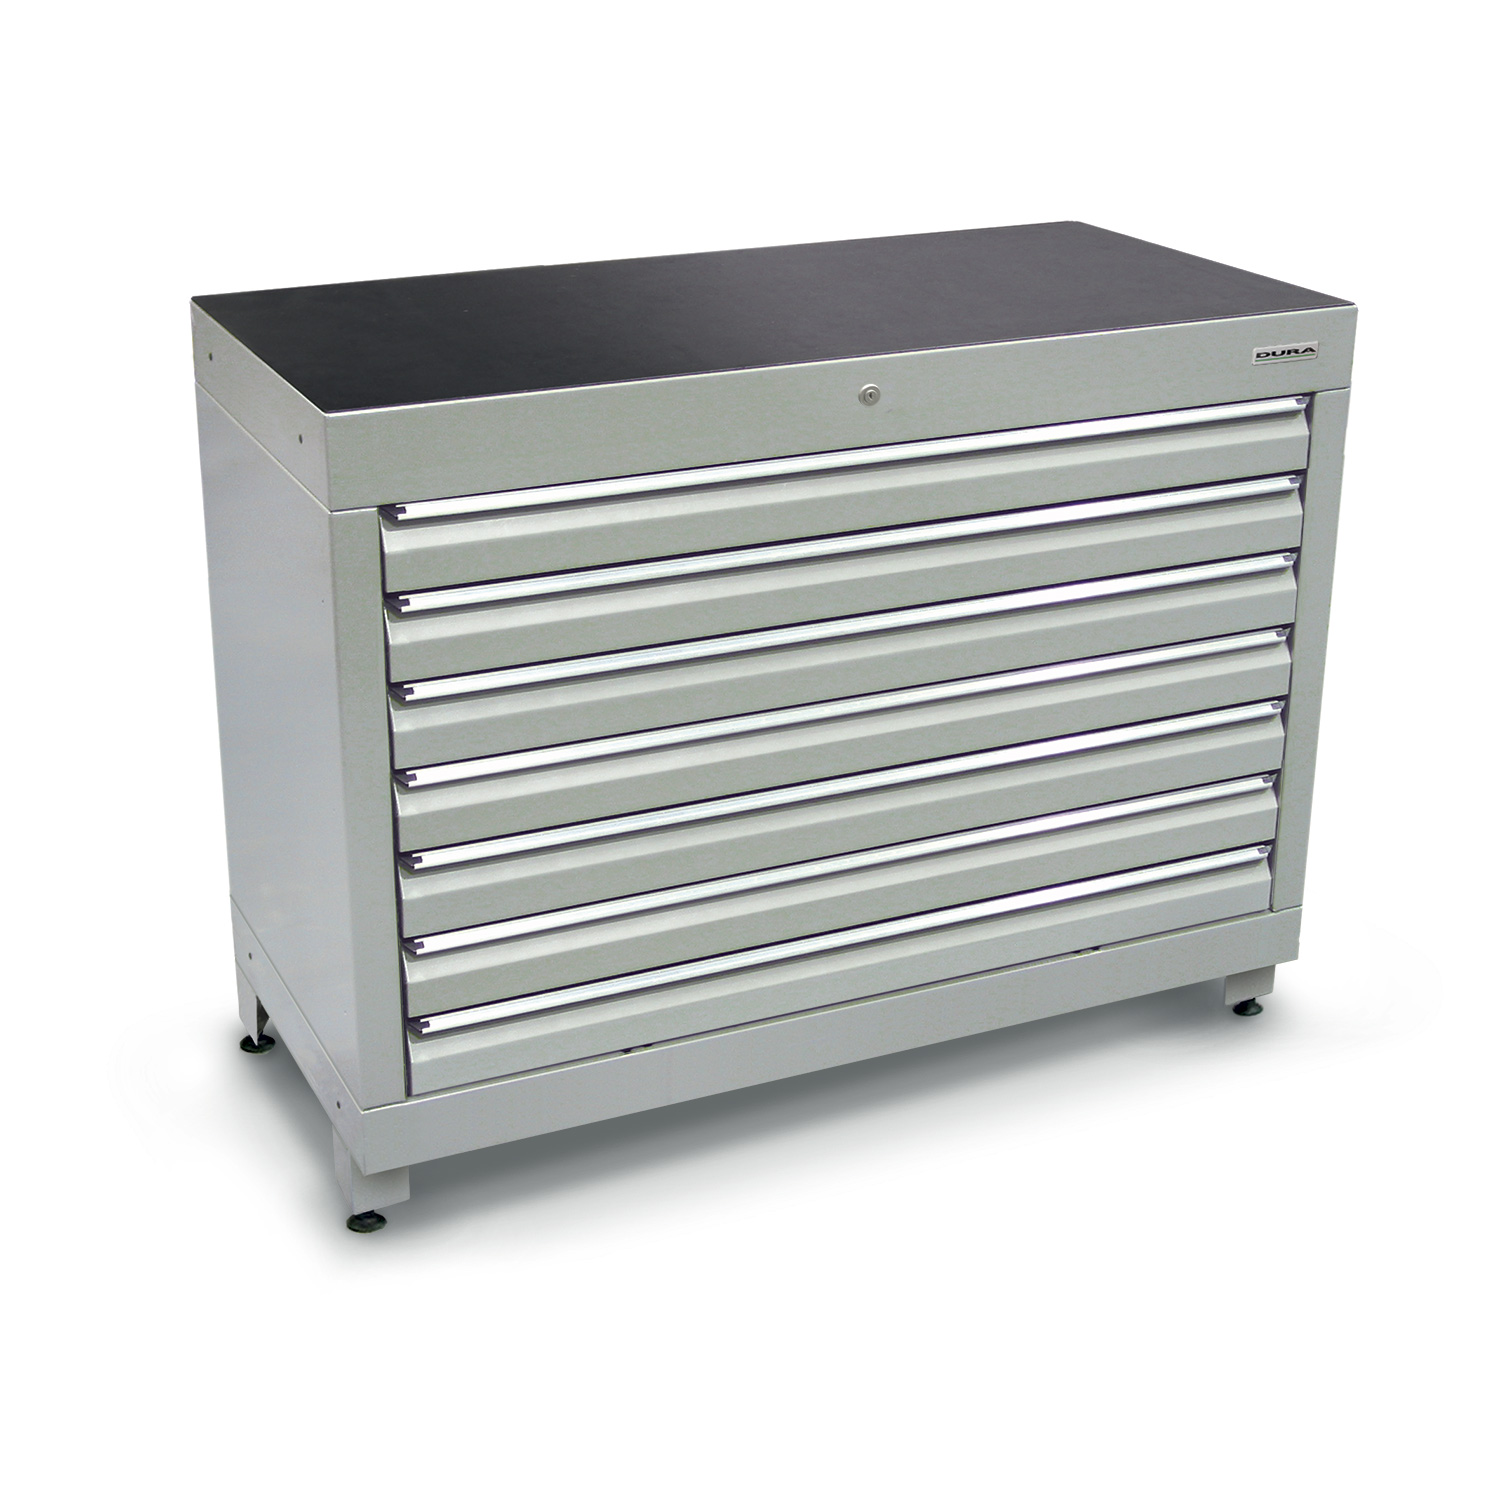 1200 series cabinet with 7 drawers (medium) and feet